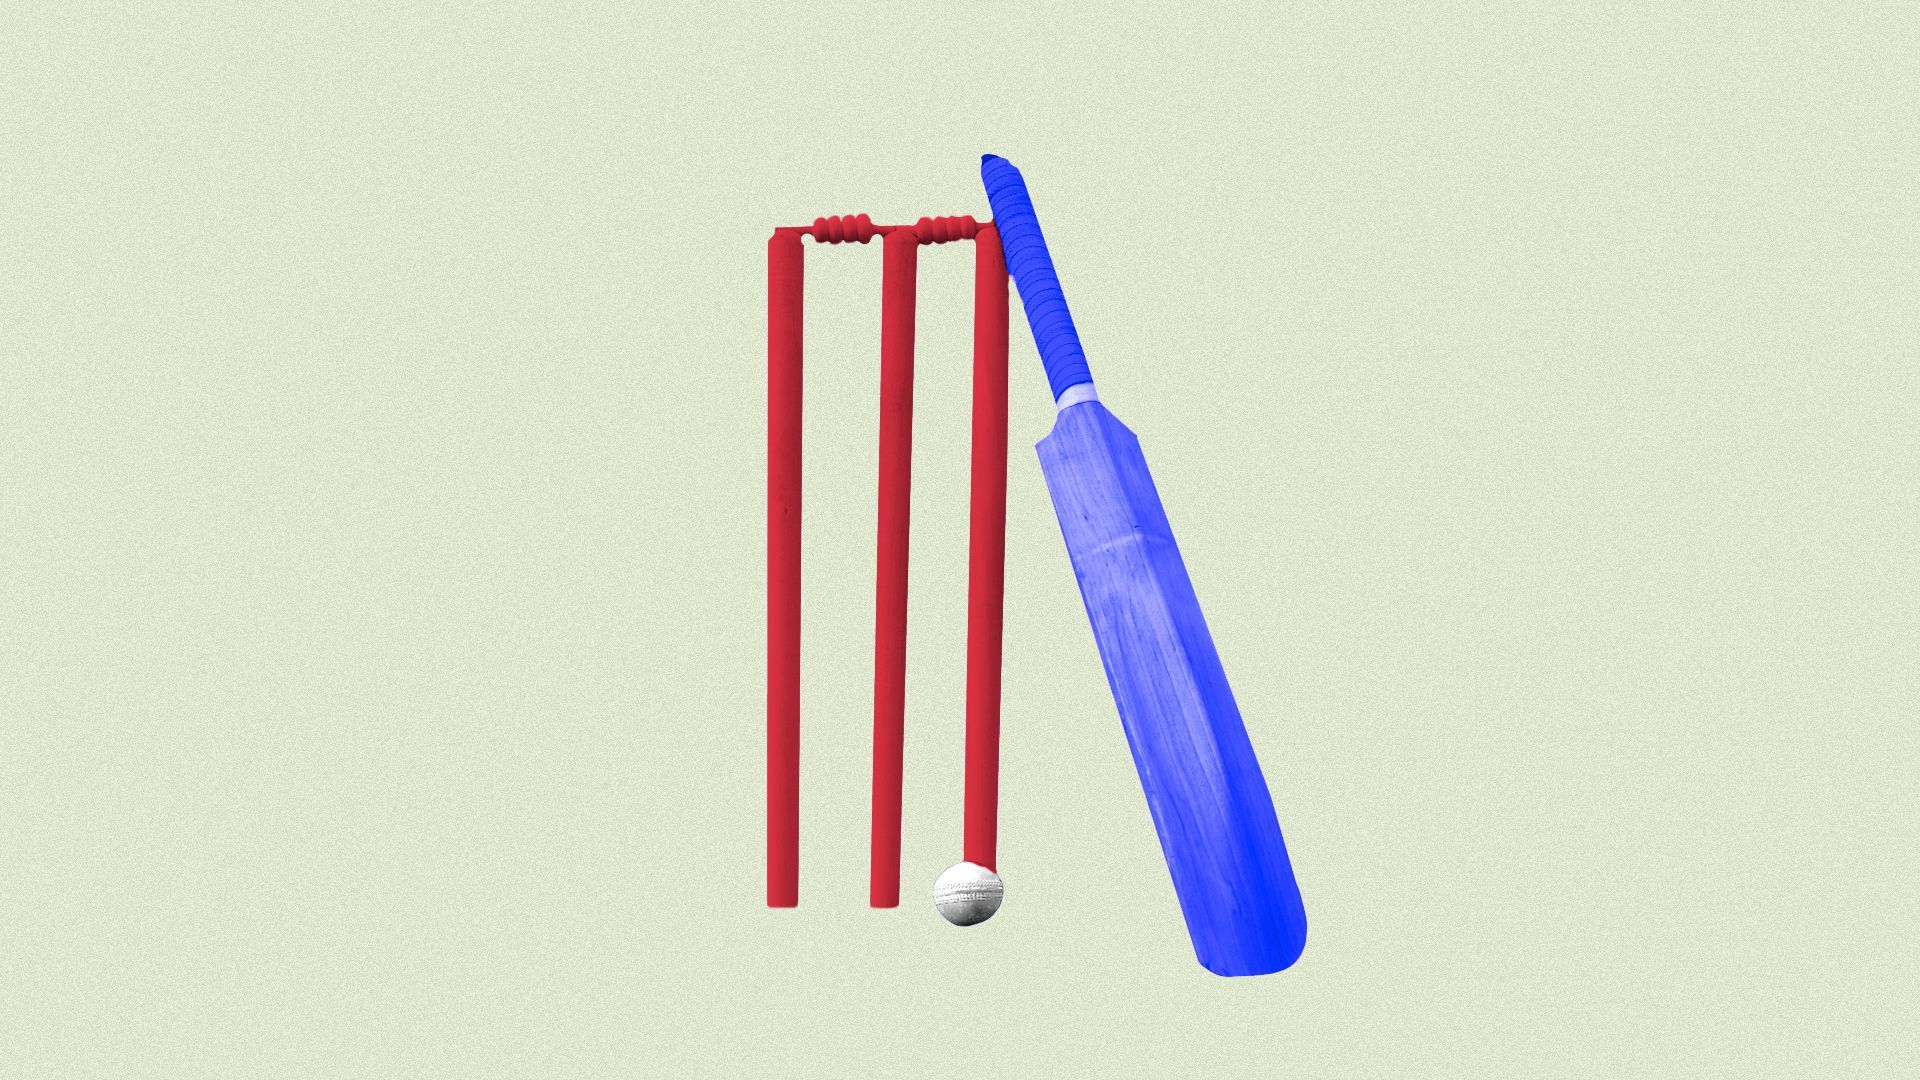 Illustration of a cricket wicket, ball and bat styled as a deconstructed US flag